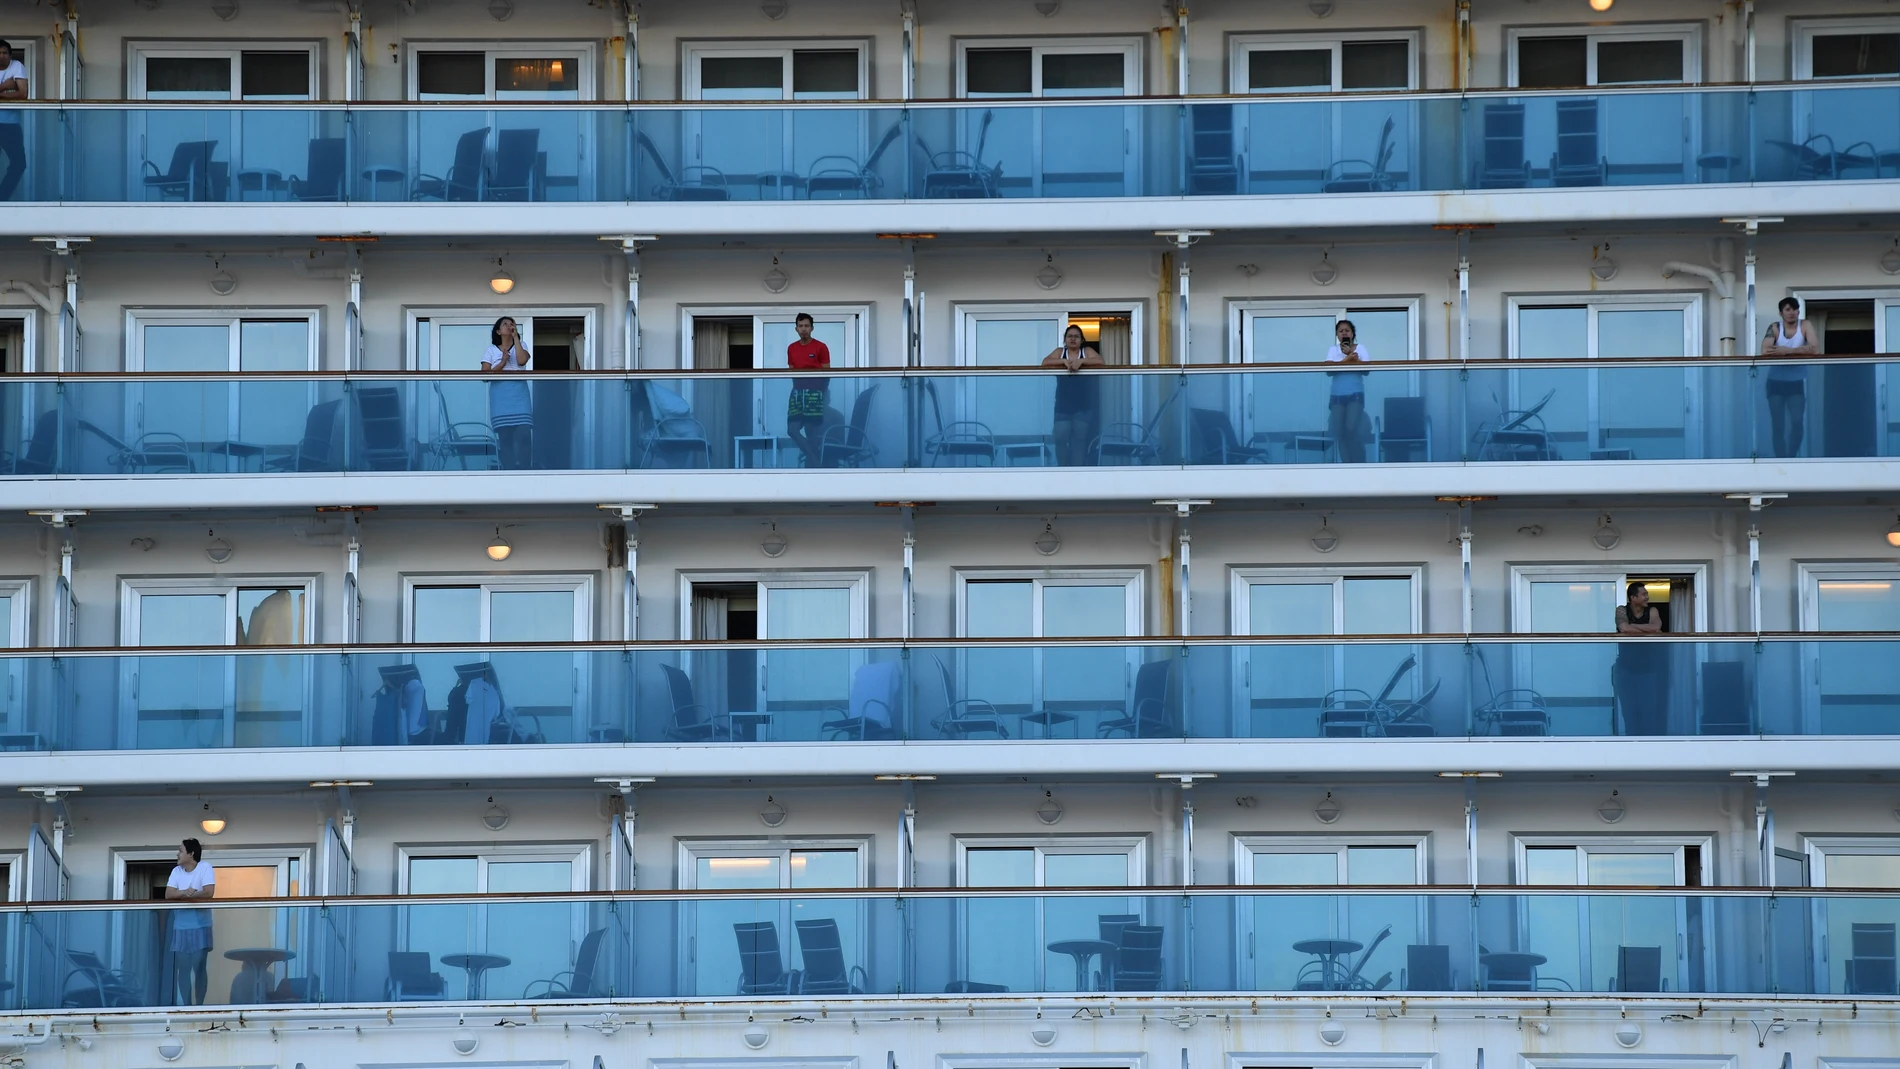 Crew on board the Ruby Princess as the cruise liner docks at Port Kembla, Wollongong, Monday, April 6, 2020. A criminal investigation will be launched into how cruise line operator Carnival Australia was allowed to disembark Ruby Princess passengers in S